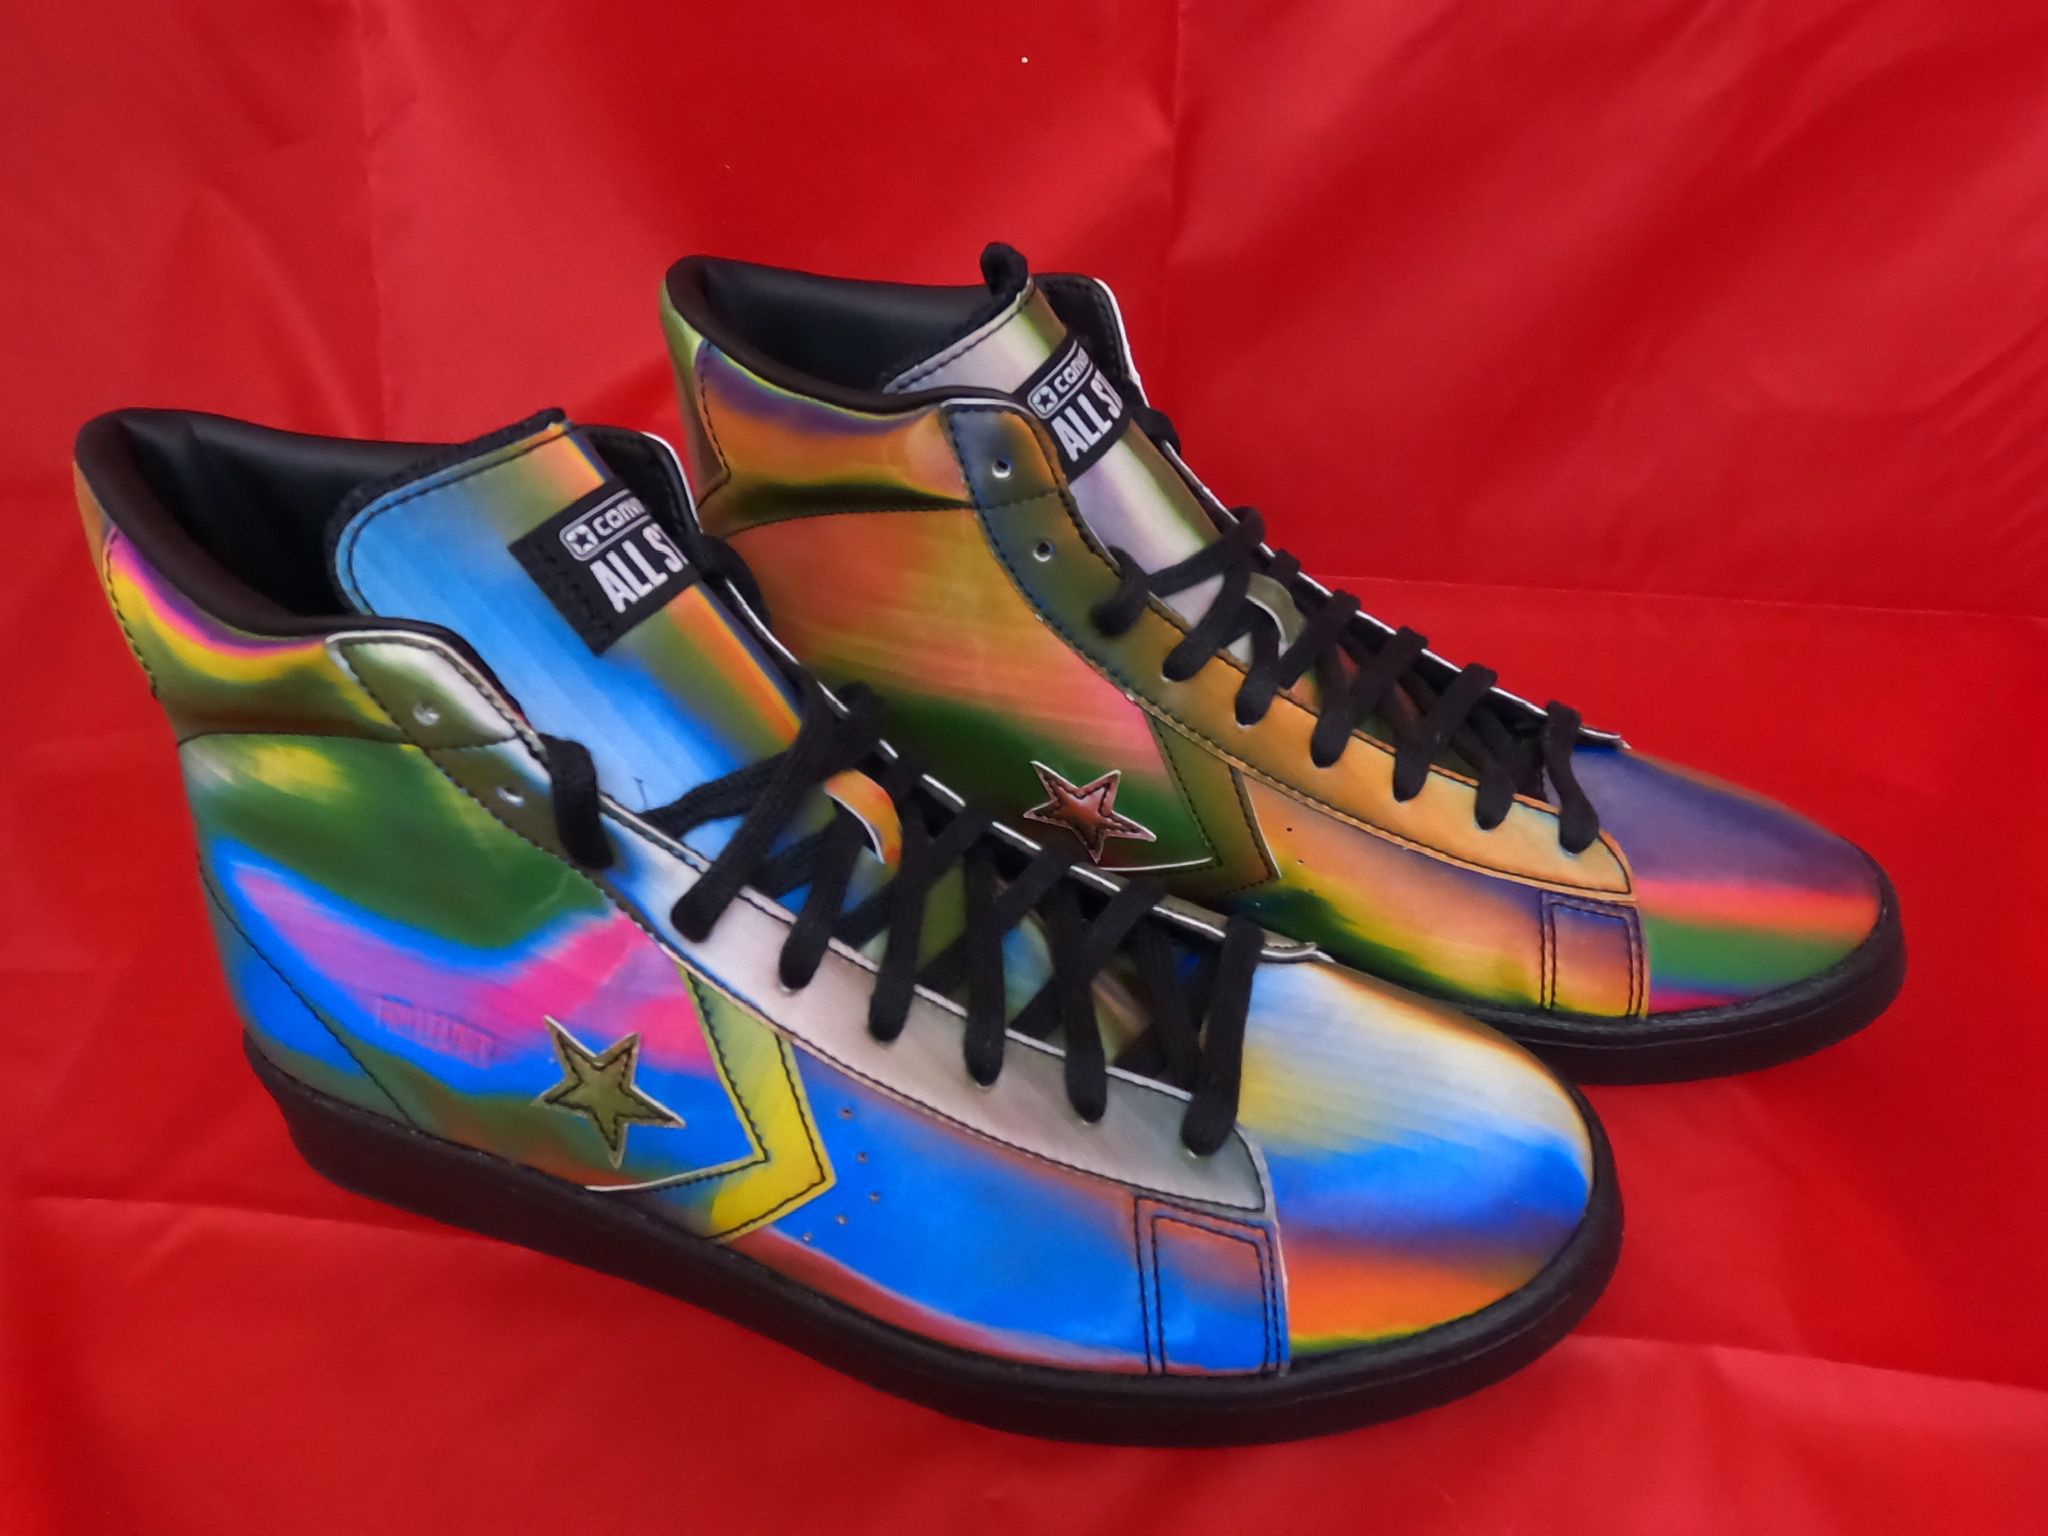 Converse All Stars  Pro High Top   Size 11 'Spectrum' Iridescent  Sneakers Size Men’s 11